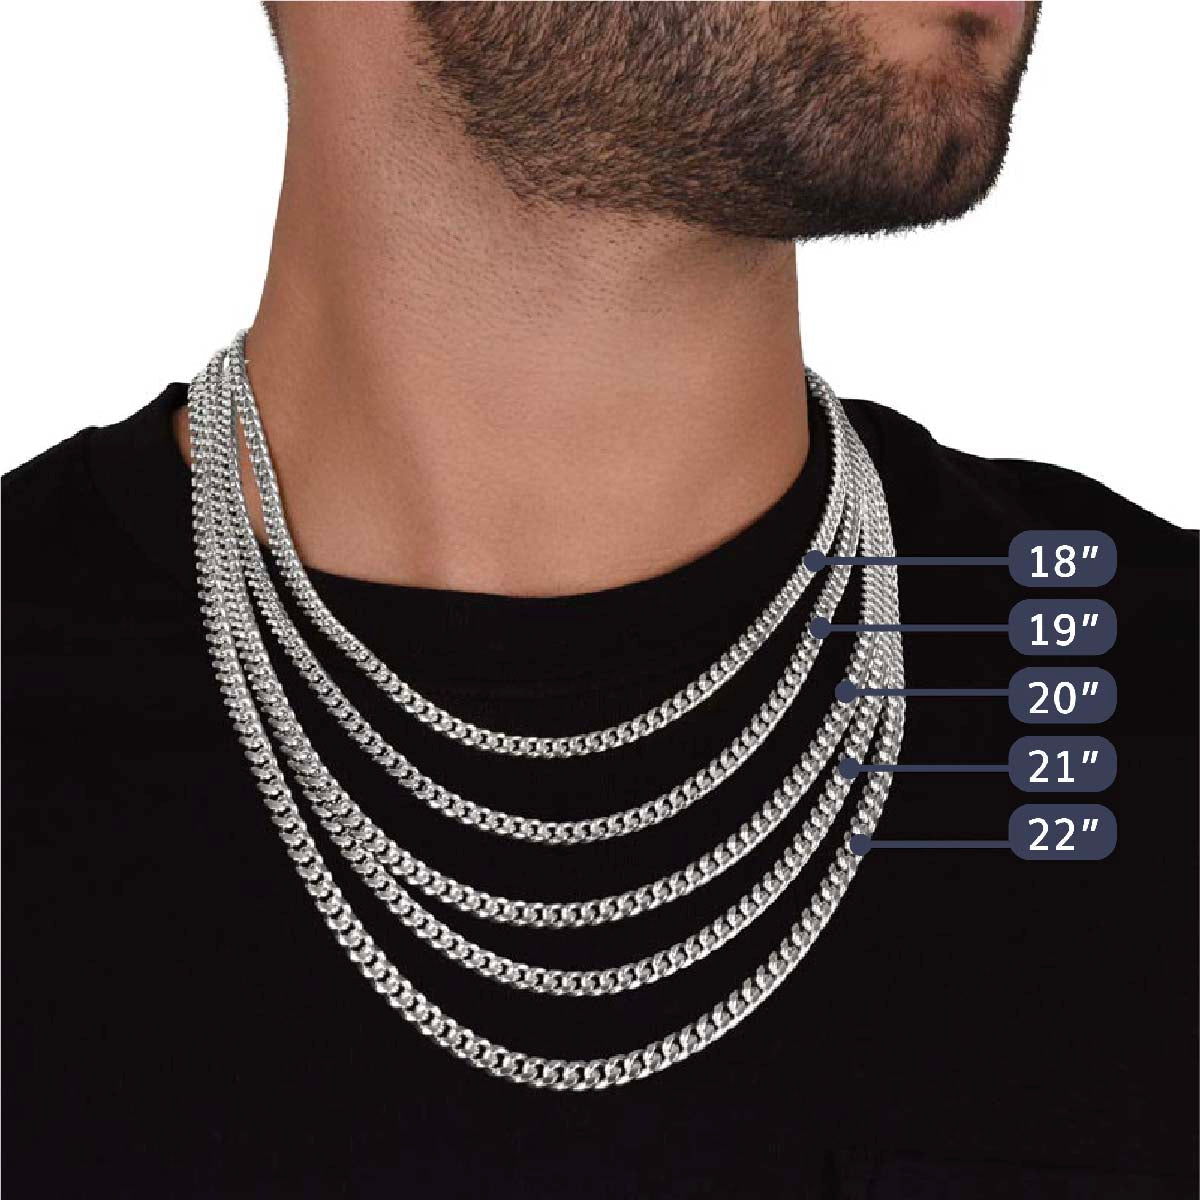 ShineOn Fulfillment Jewelry 316L Stainless Steel Man Of Strength - Stand Tall - 5mm Cuban Link Chain Necklace